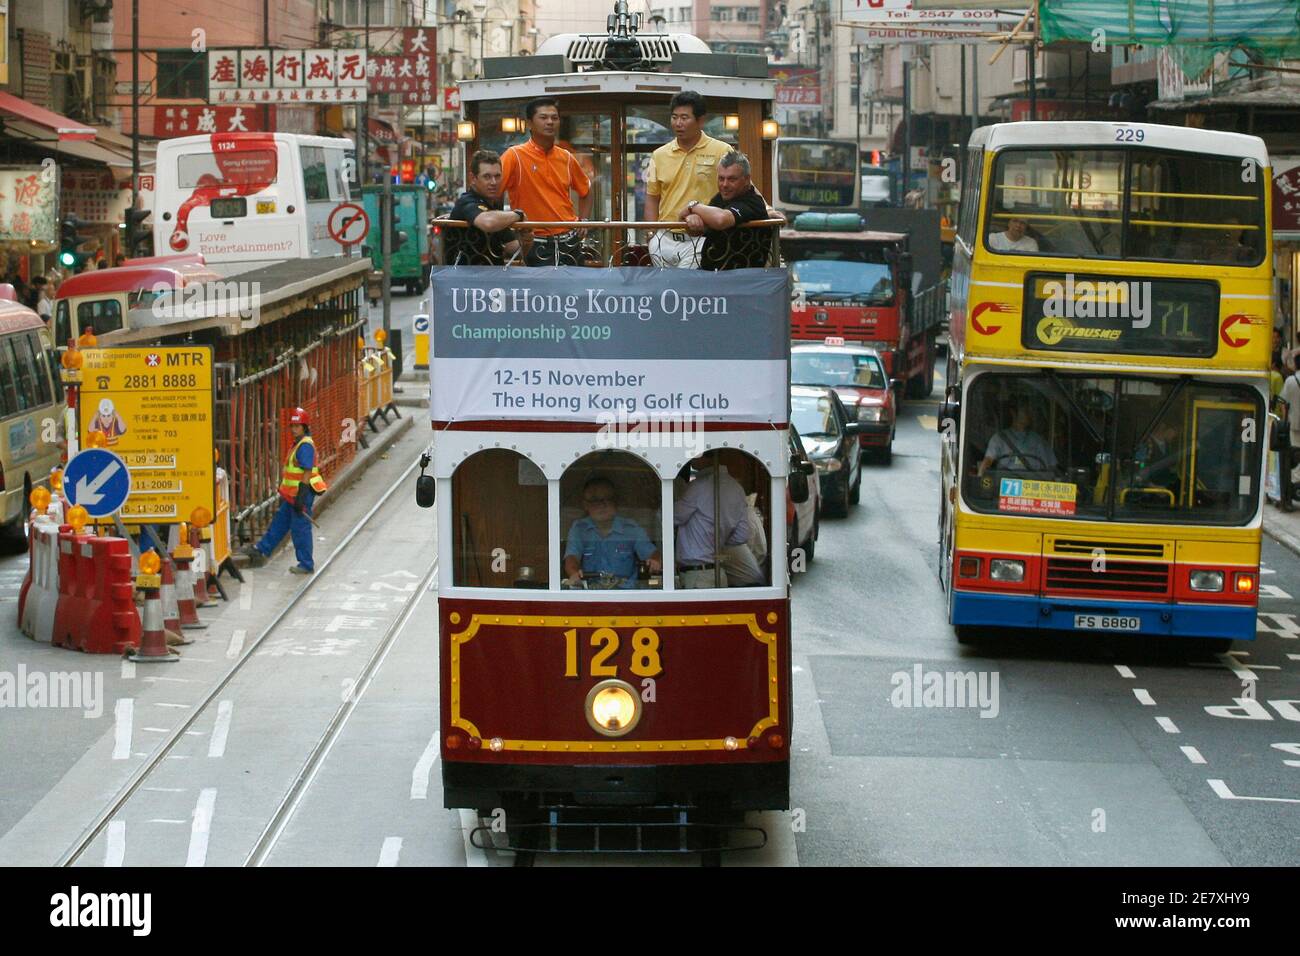 Lee Westwood of Britain (L), Lin Wen-tang of Taiwan (2nd L), Y.E. Yang of South Korea and Darren Clarke of Northern Ireland (R) tour the city by tram ahead of the Hong Kong Open golf tournament November 10, 2009.  REUTERS/Tyrone Siu  (CHINA SPORT GOLF TRAVEL) Stock Photo